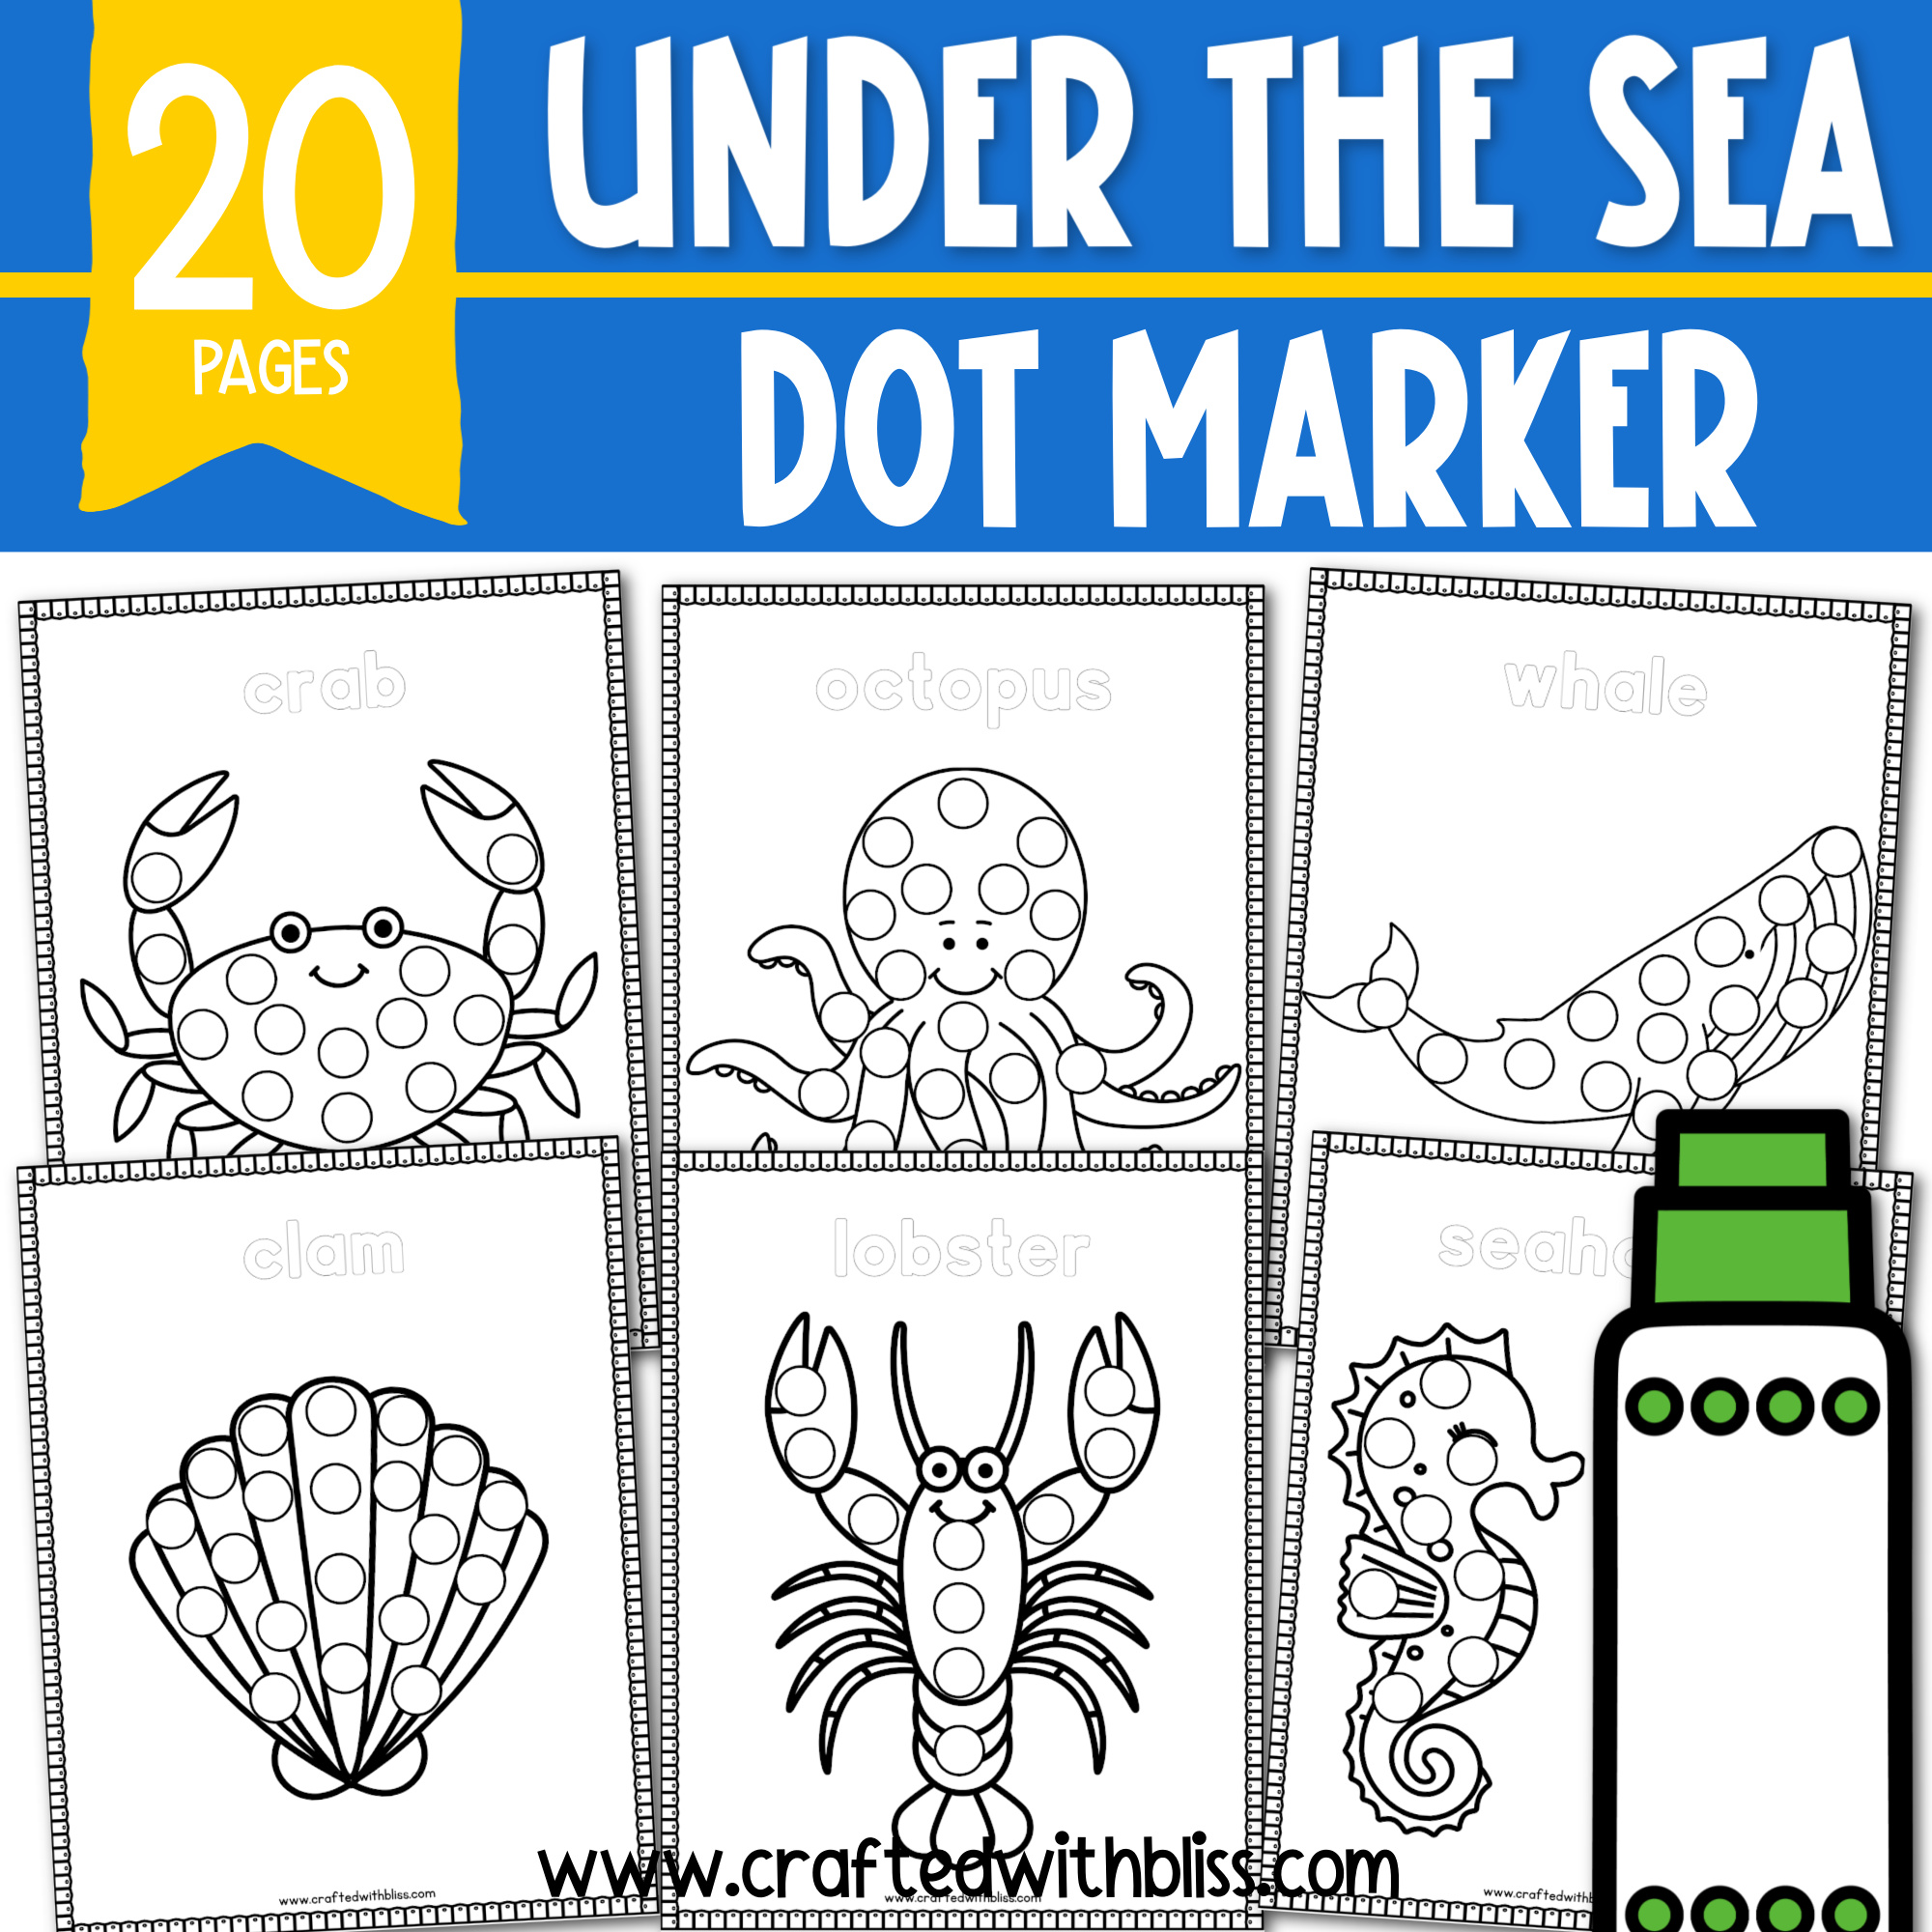 Free Under the Sea Dot Marker Crafts